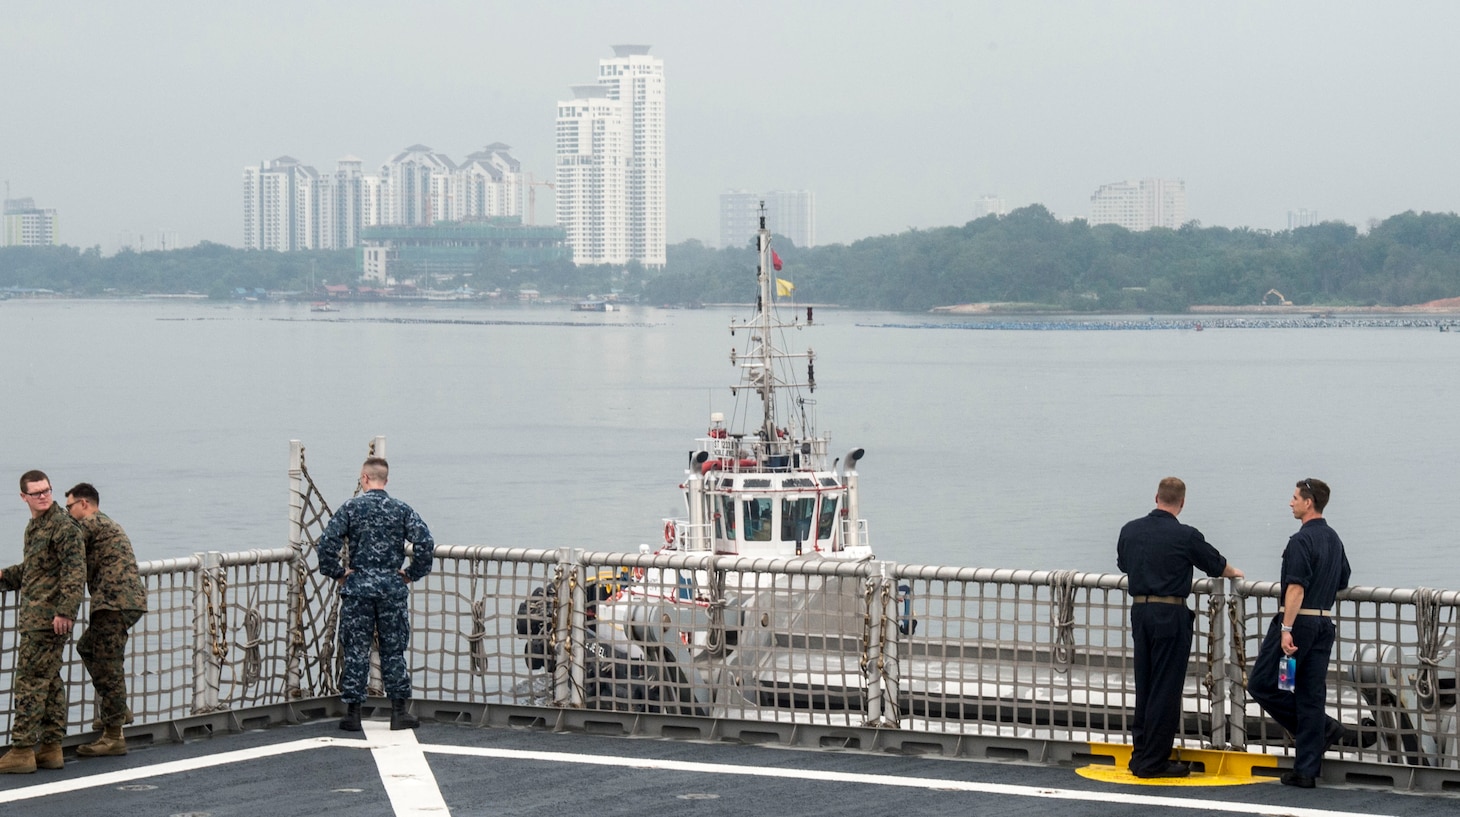 Sailors and Marines observe as USNS Millinocket (T-EPF 3) departs Singapore. USNS Millinocket is supporting a U.S. 7th Fleet theater security cooperation mission and will be traveling to several Indo-Pacific countries in the coming weeks.